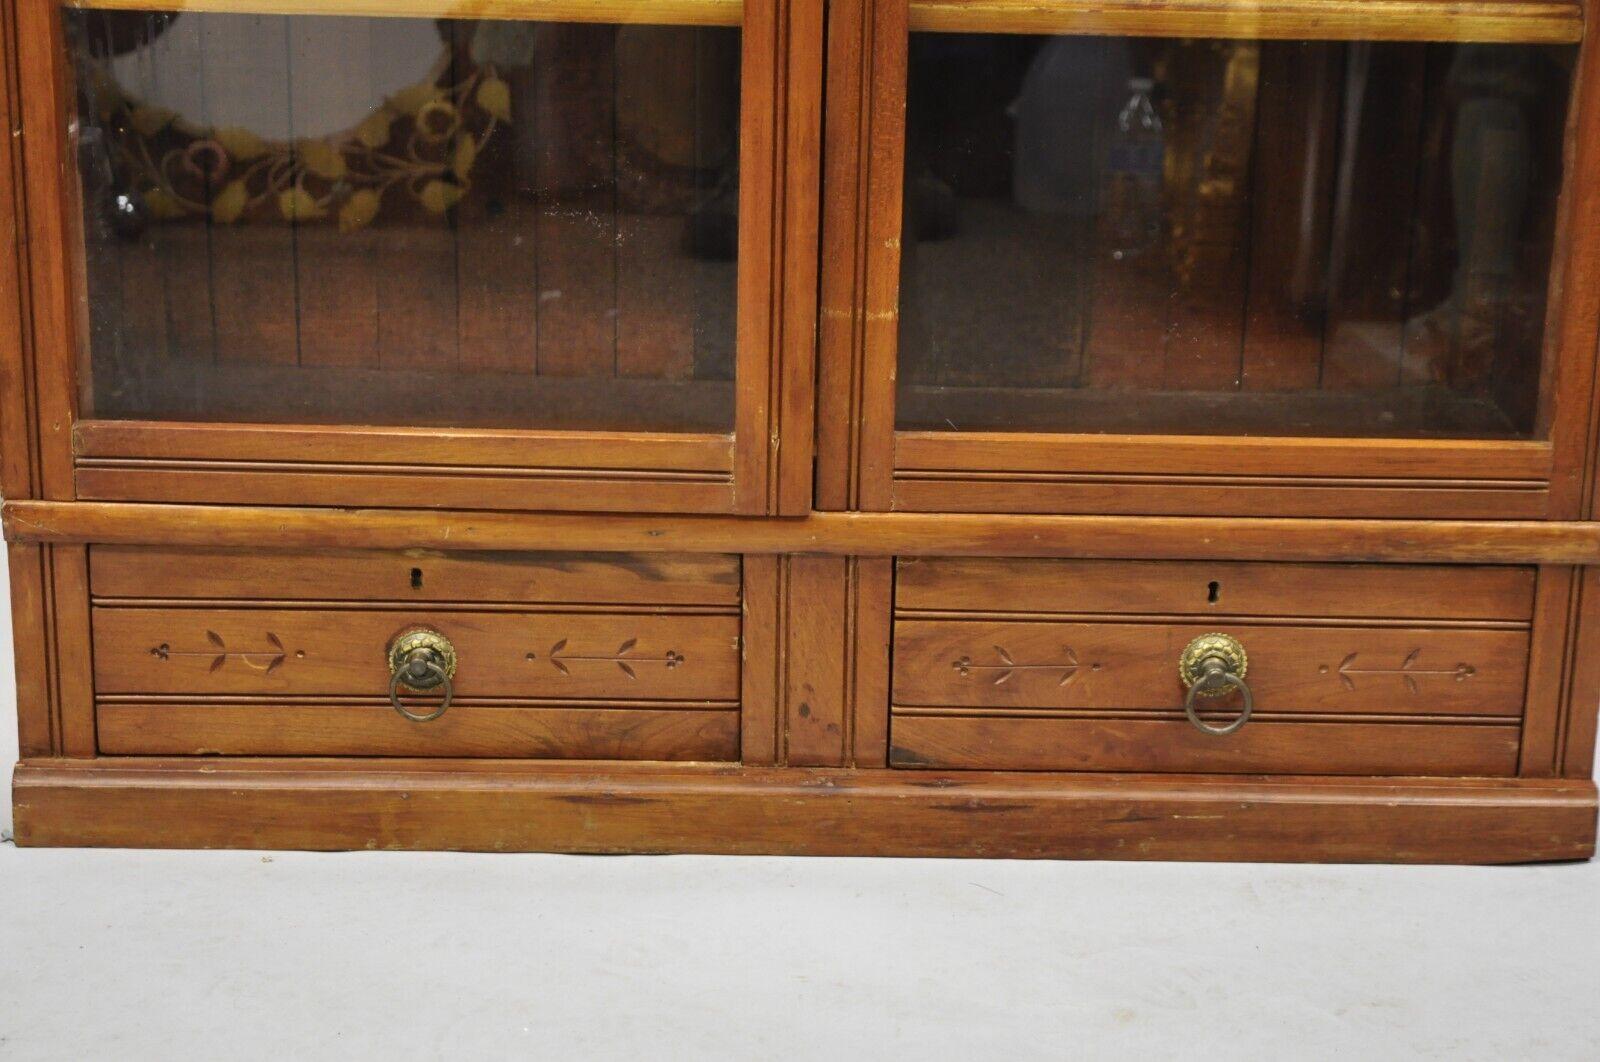 Antique Eastlake Victorian Chestnut 2 Door Bookcase China Cabinet with Drawers In Good Condition For Sale In Philadelphia, PA